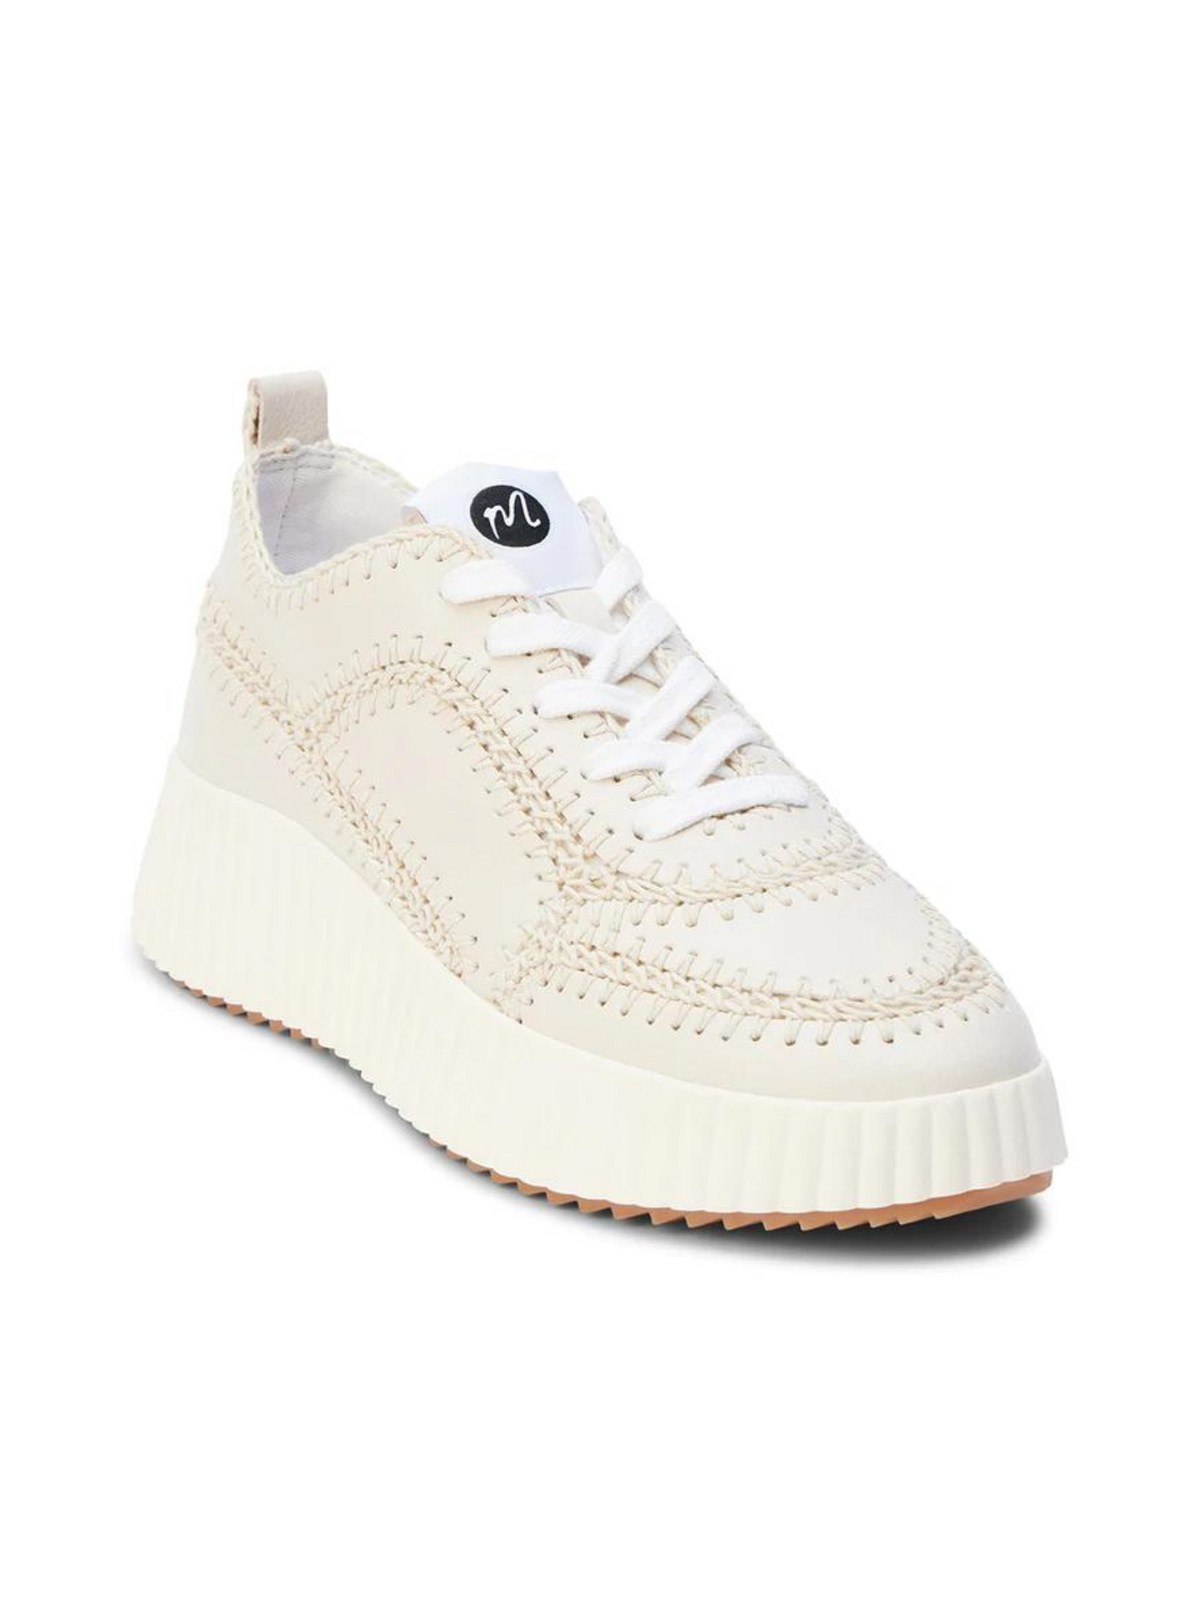 Nelson Sneaker in Natural